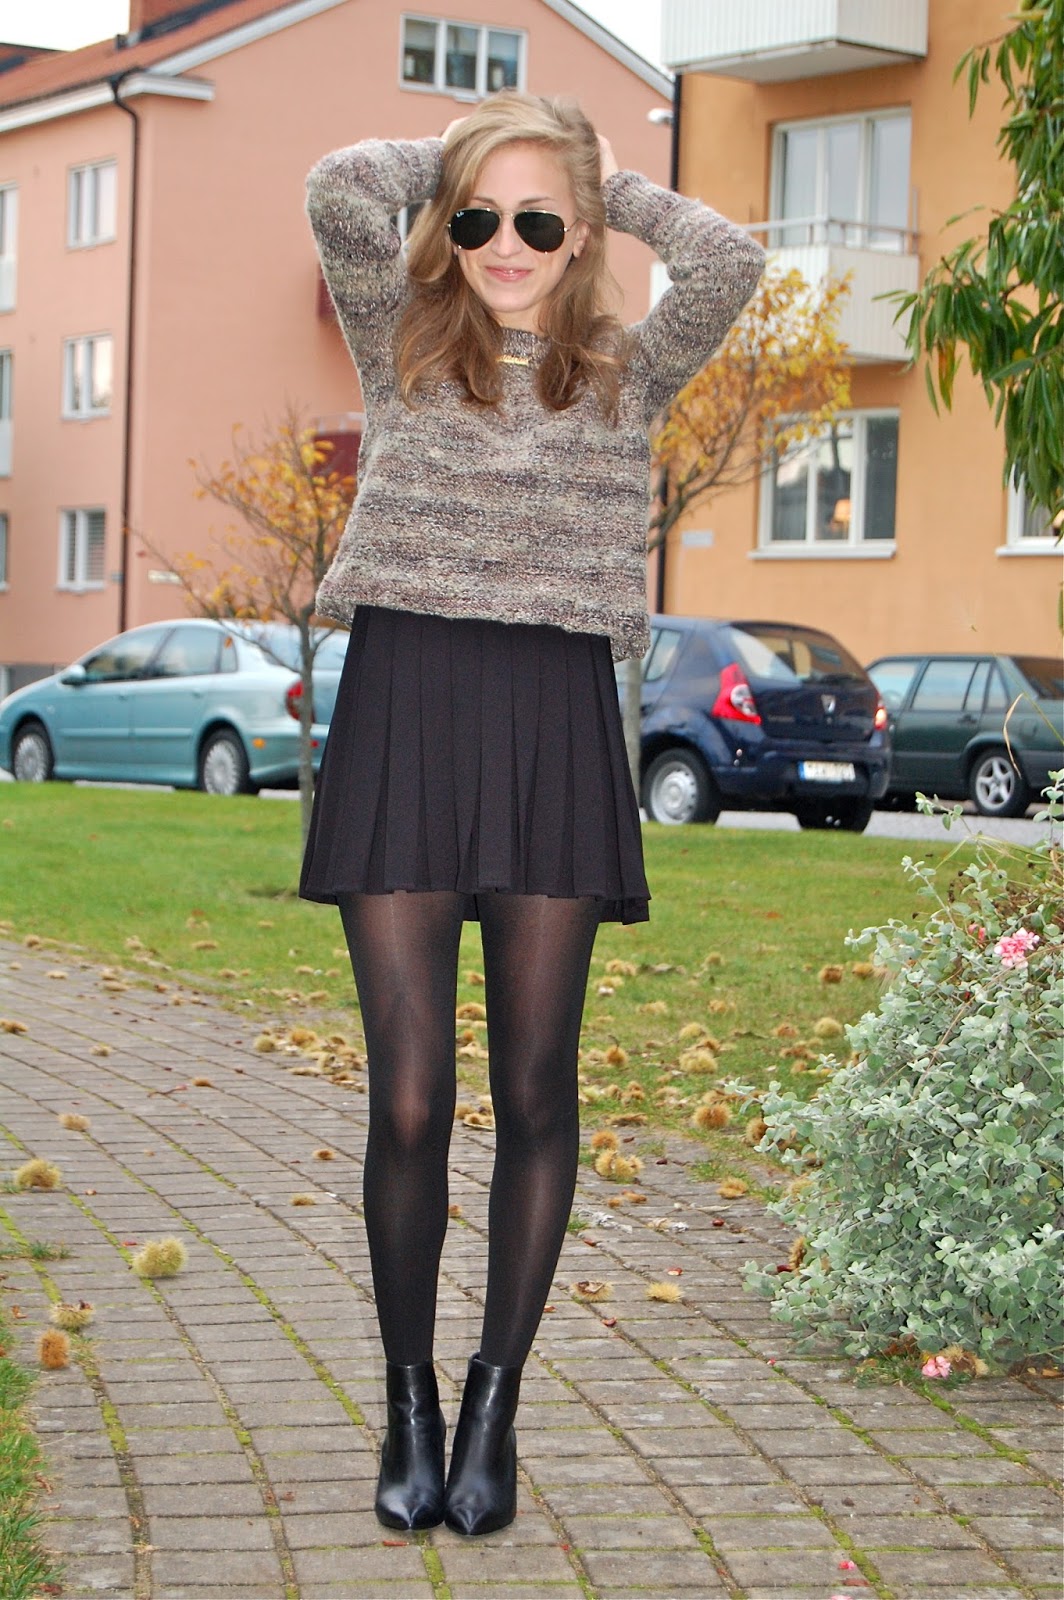 Sweaters with skirts - Fashionmylegs : The tights and hosiery blog